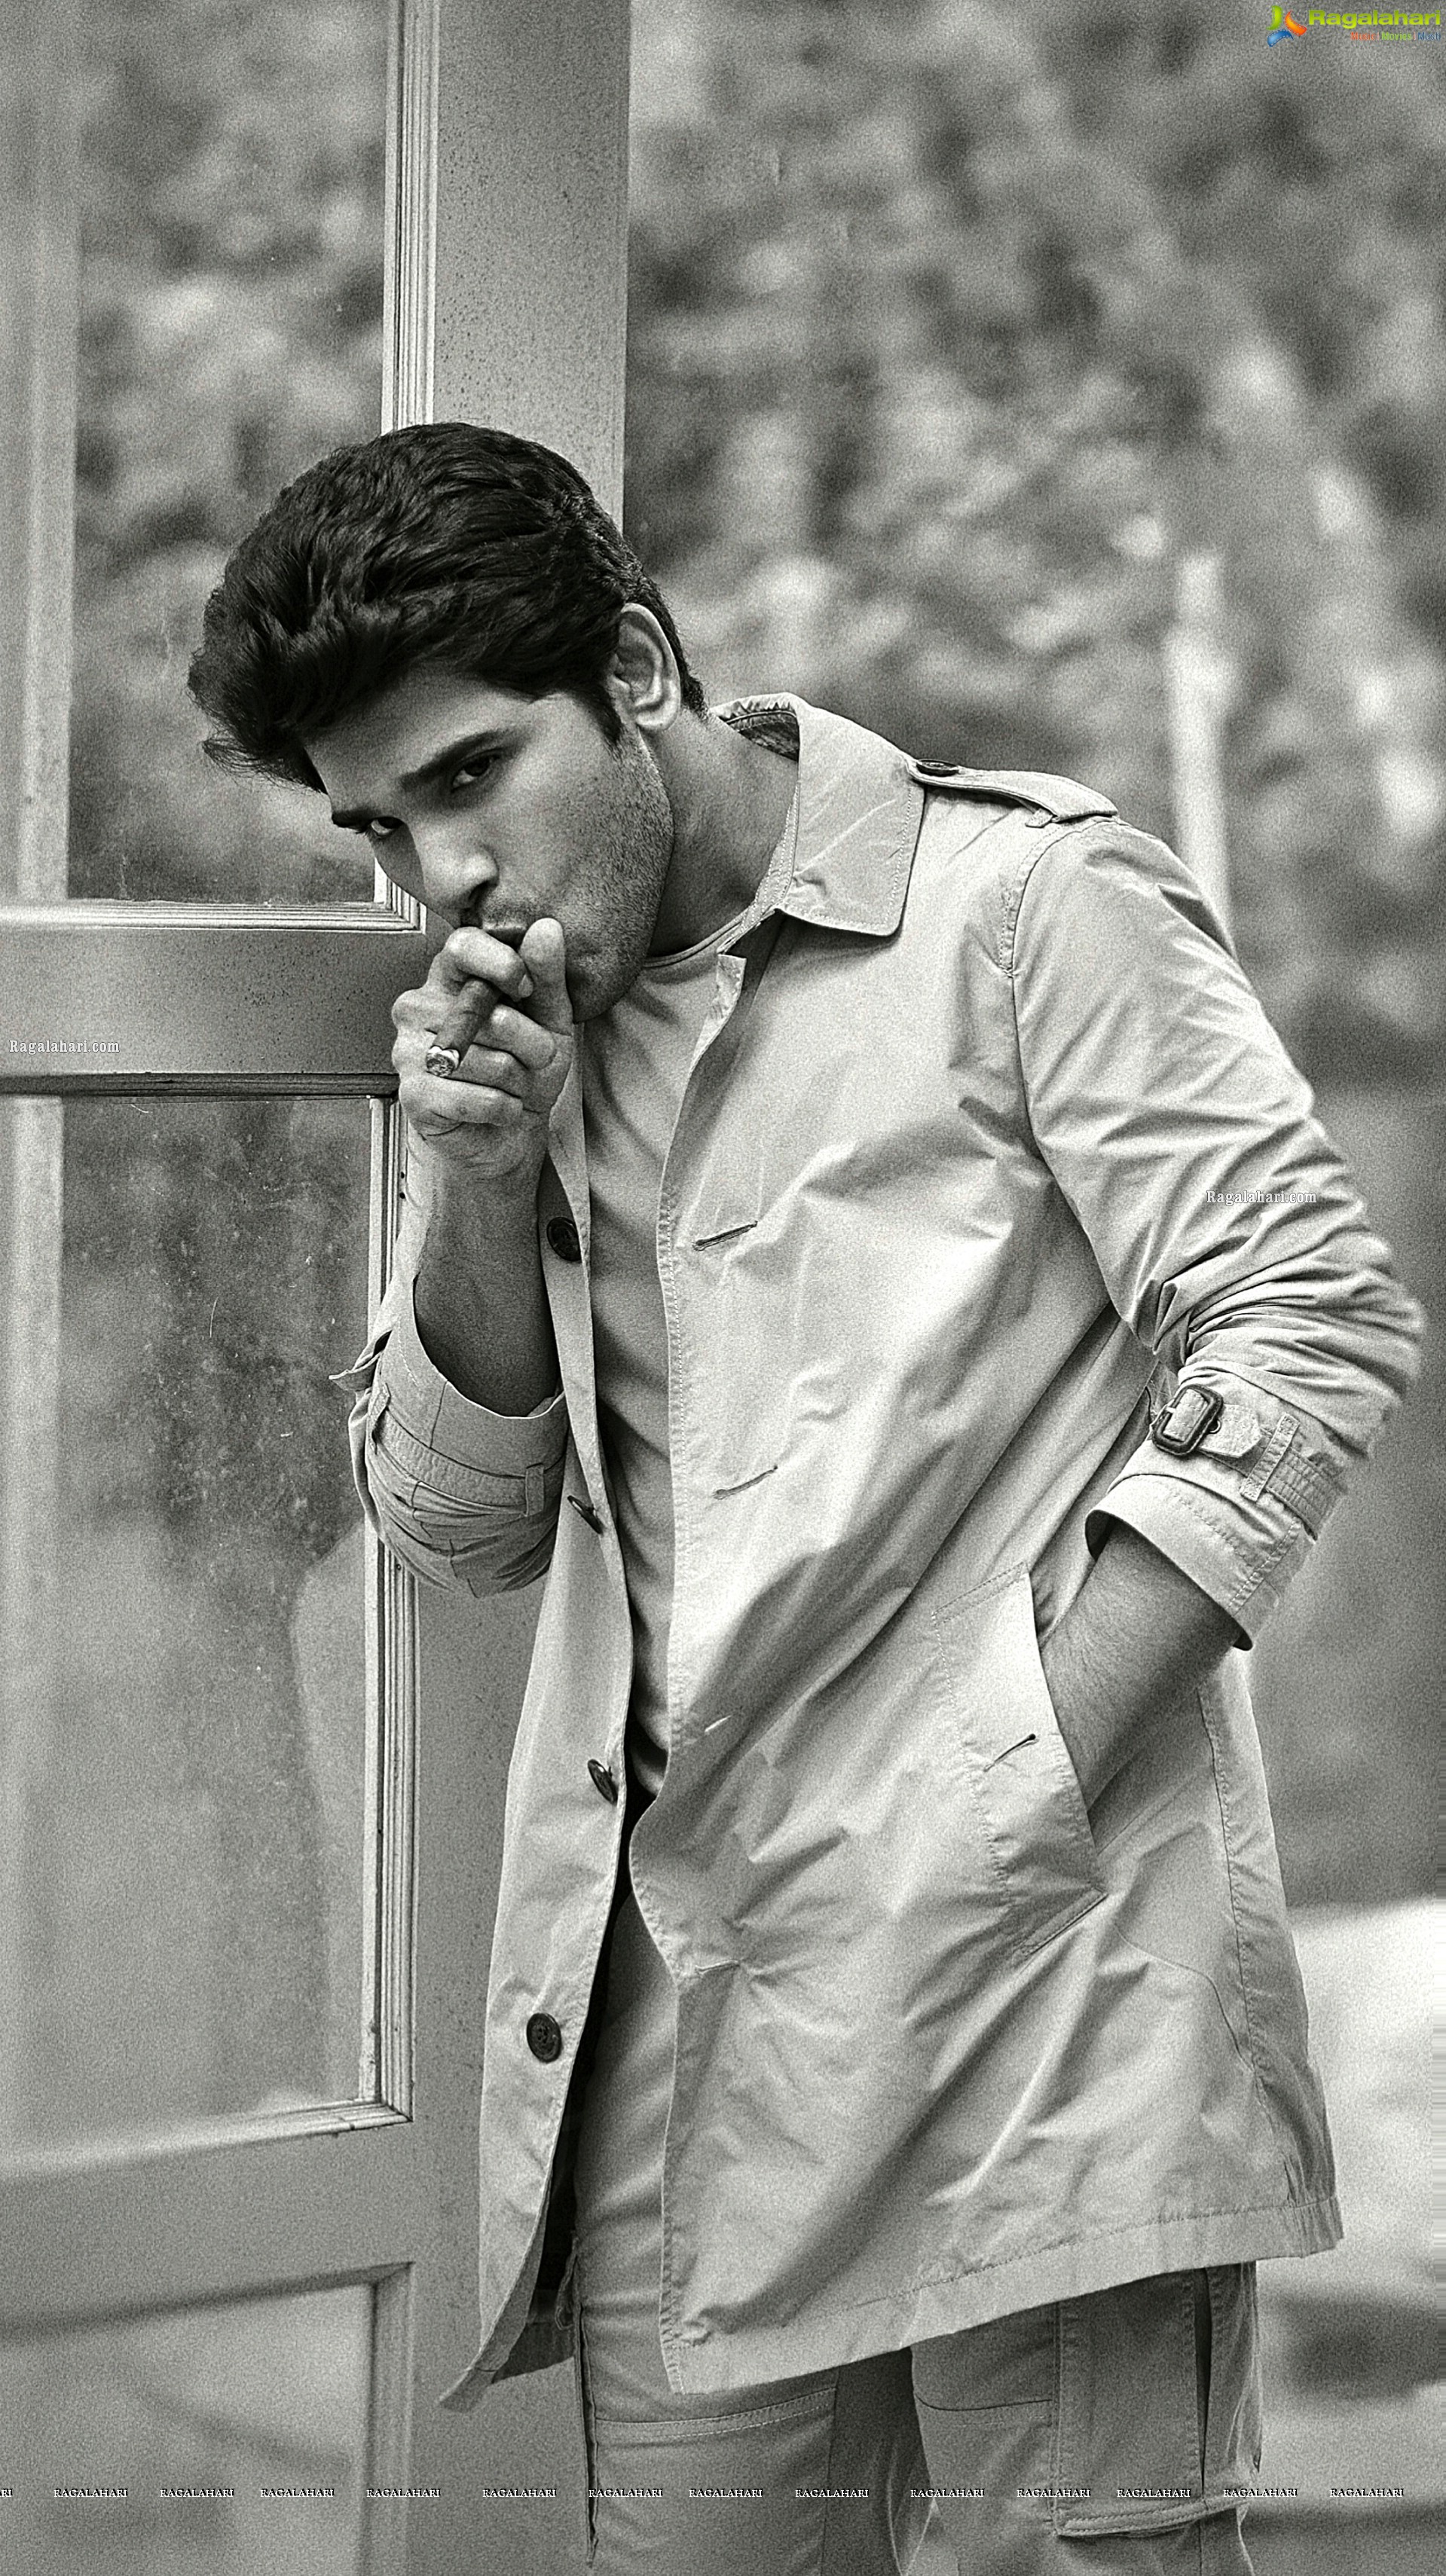 Allu Sirish Poses with cigar in mouth